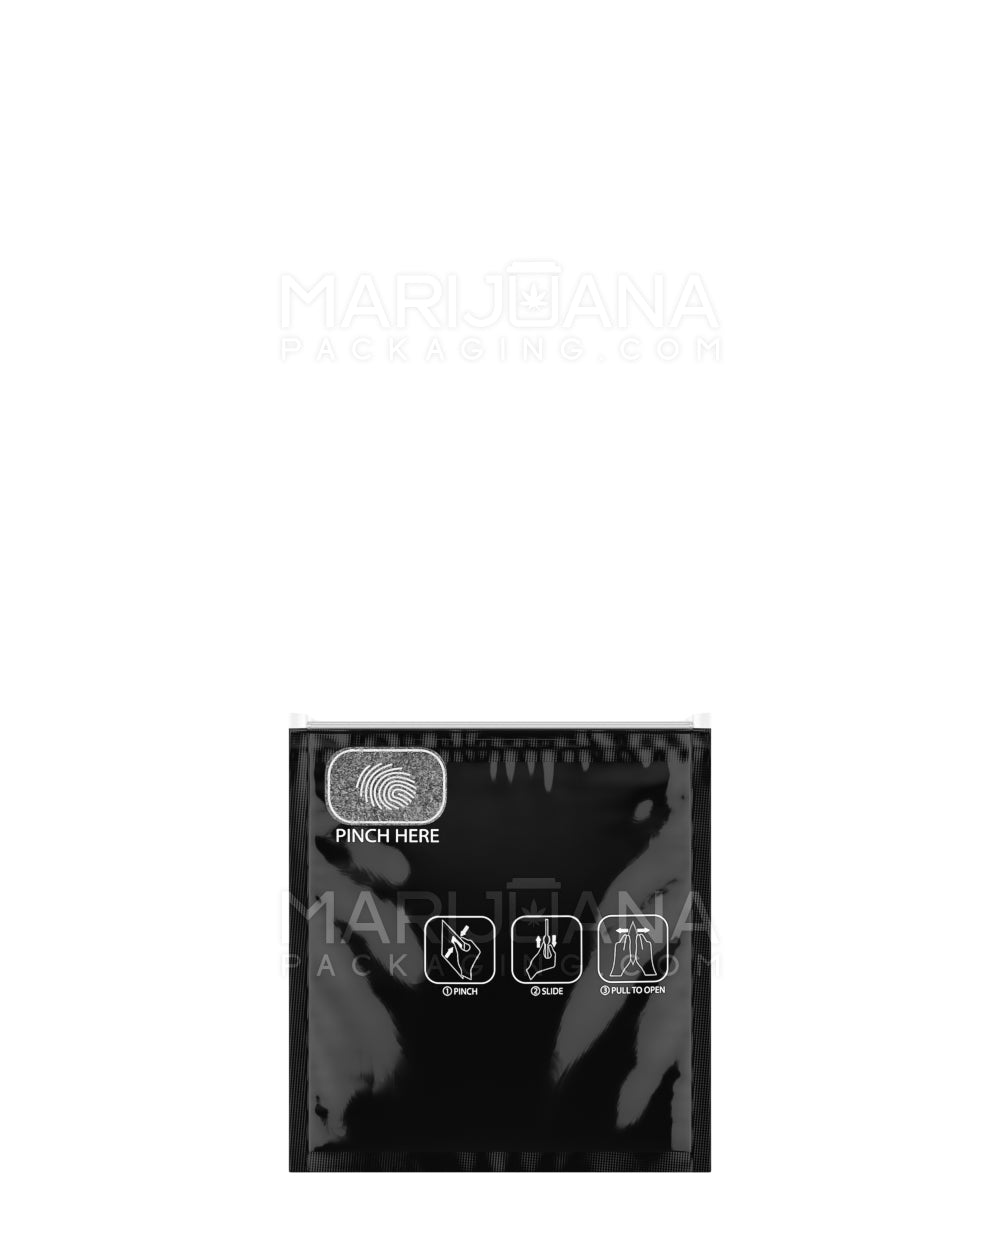 Child Resistant | Pinch N Slide ASTM Glossy Black Mylar Bags | 3.4in x 3.7in - 1g - 250 Count - 2